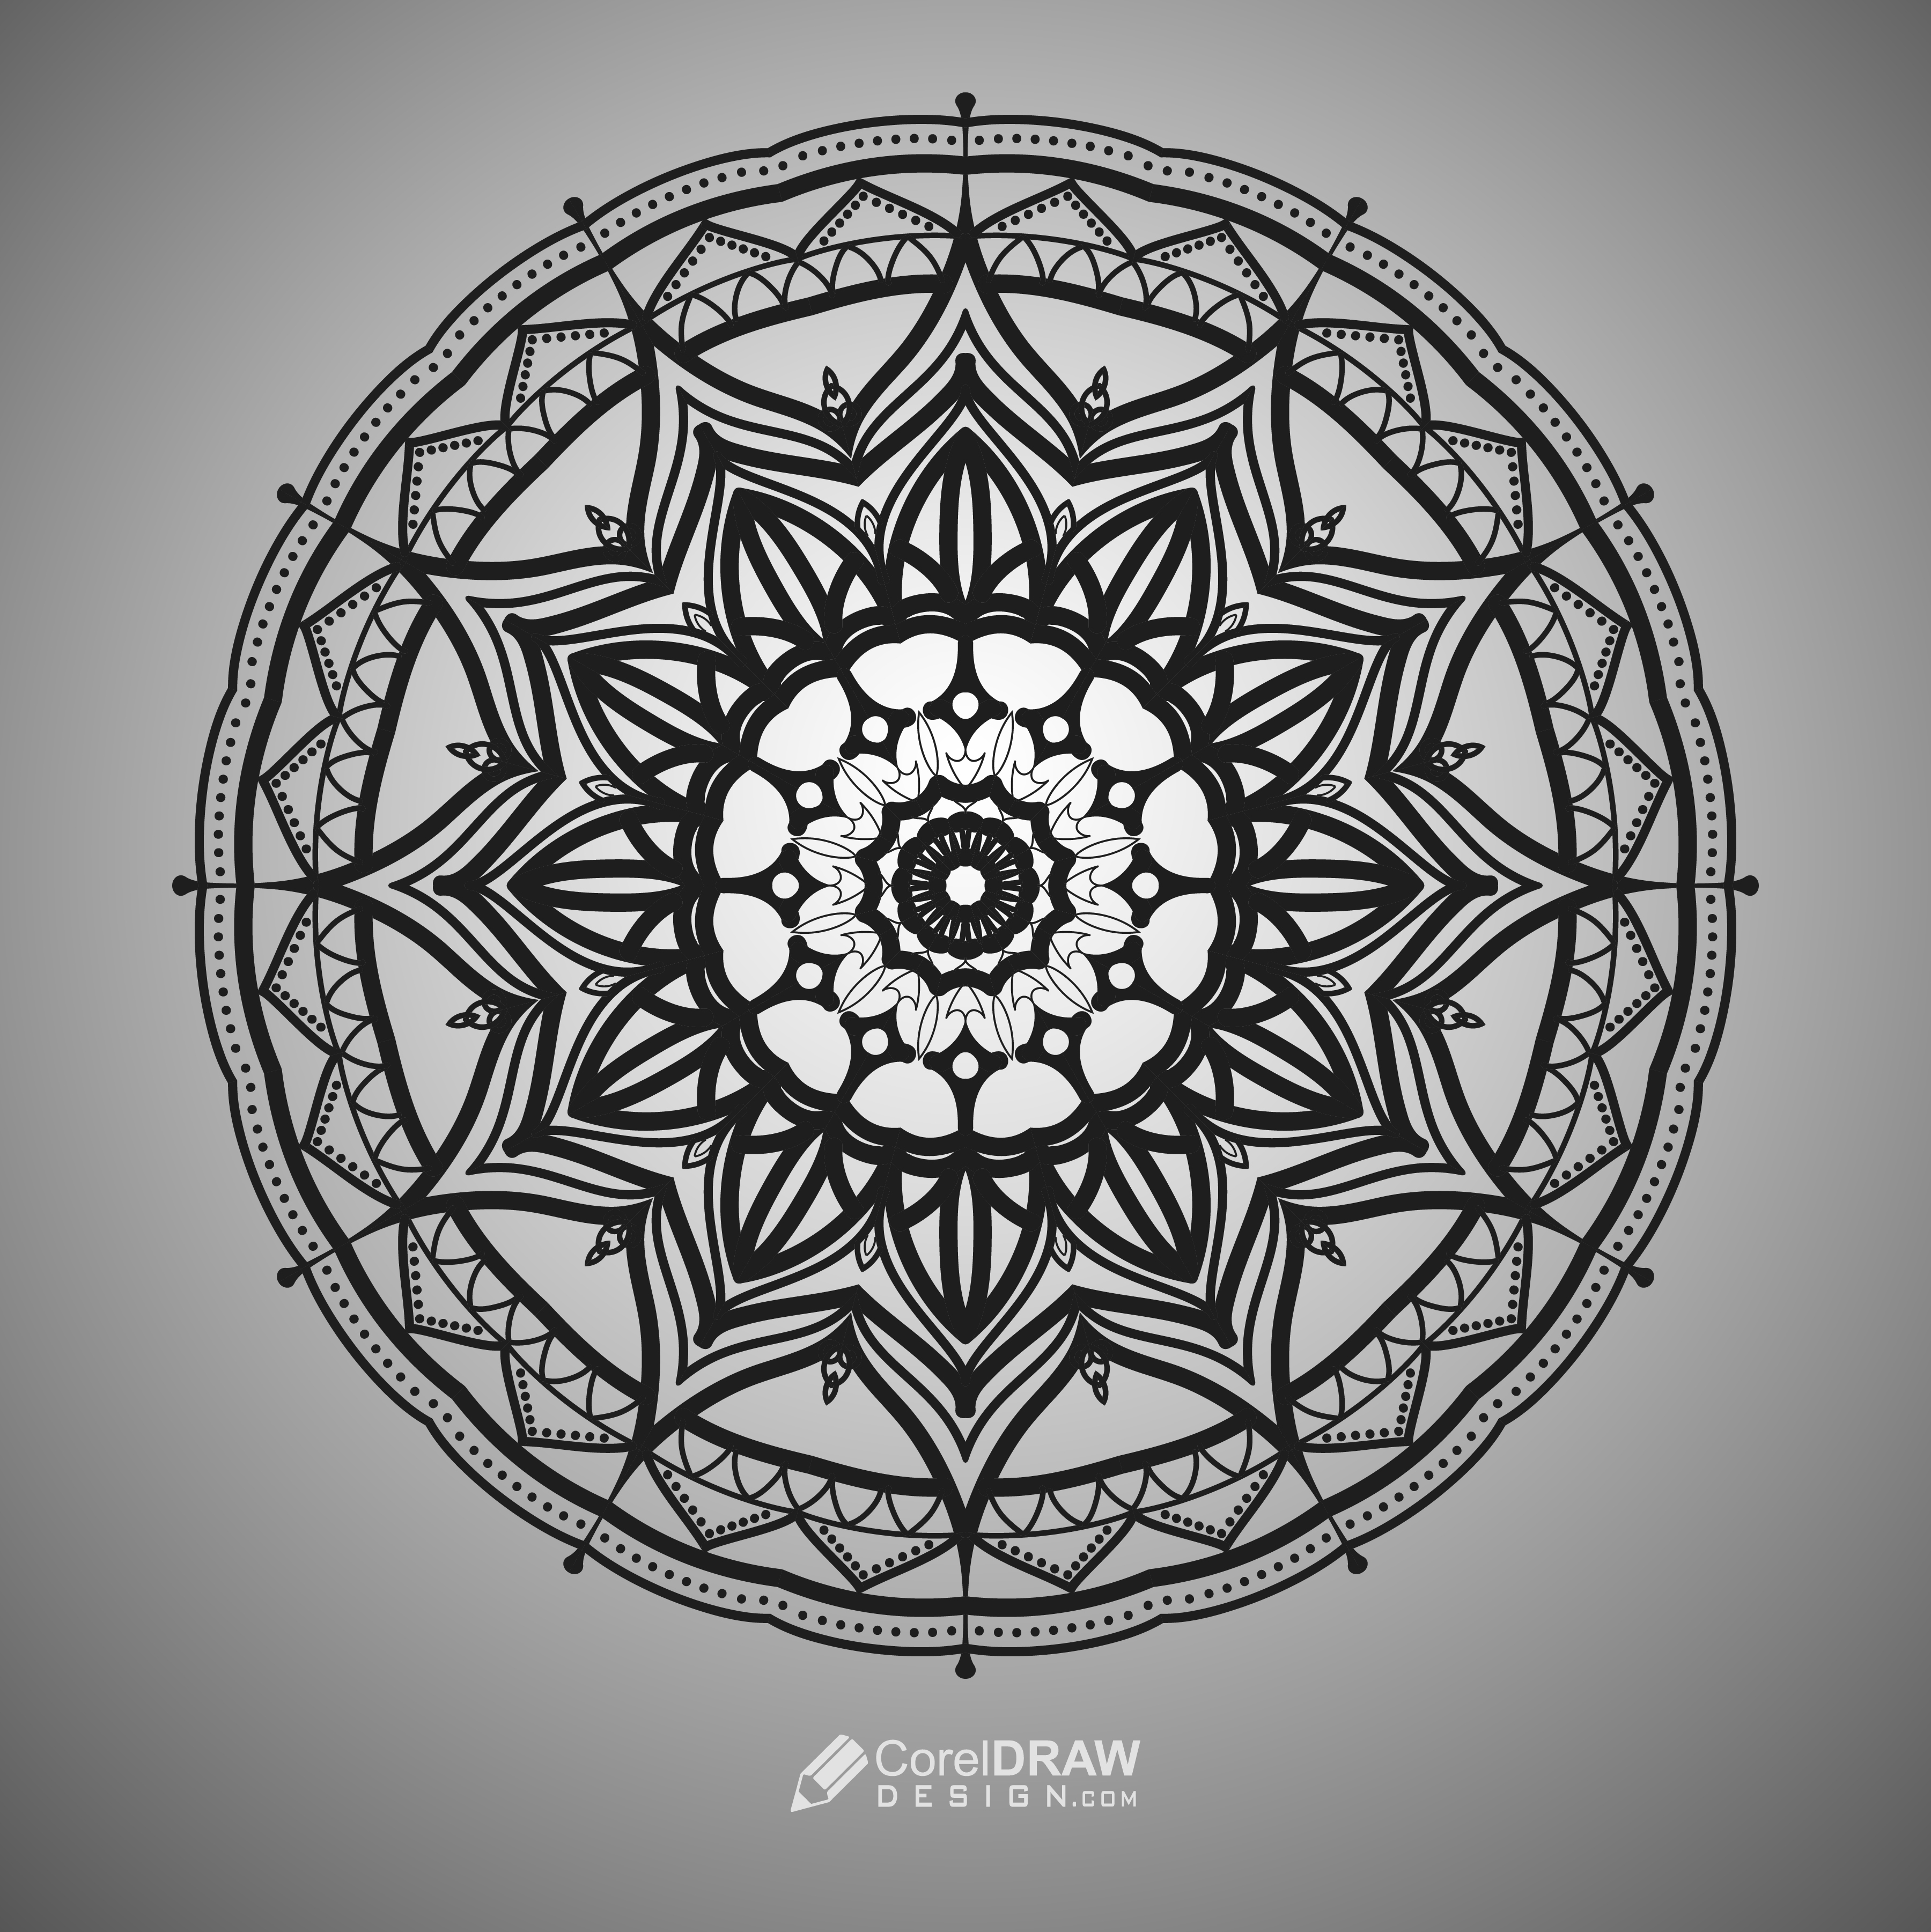 Mandala drawing • Recipes for Wellbeing